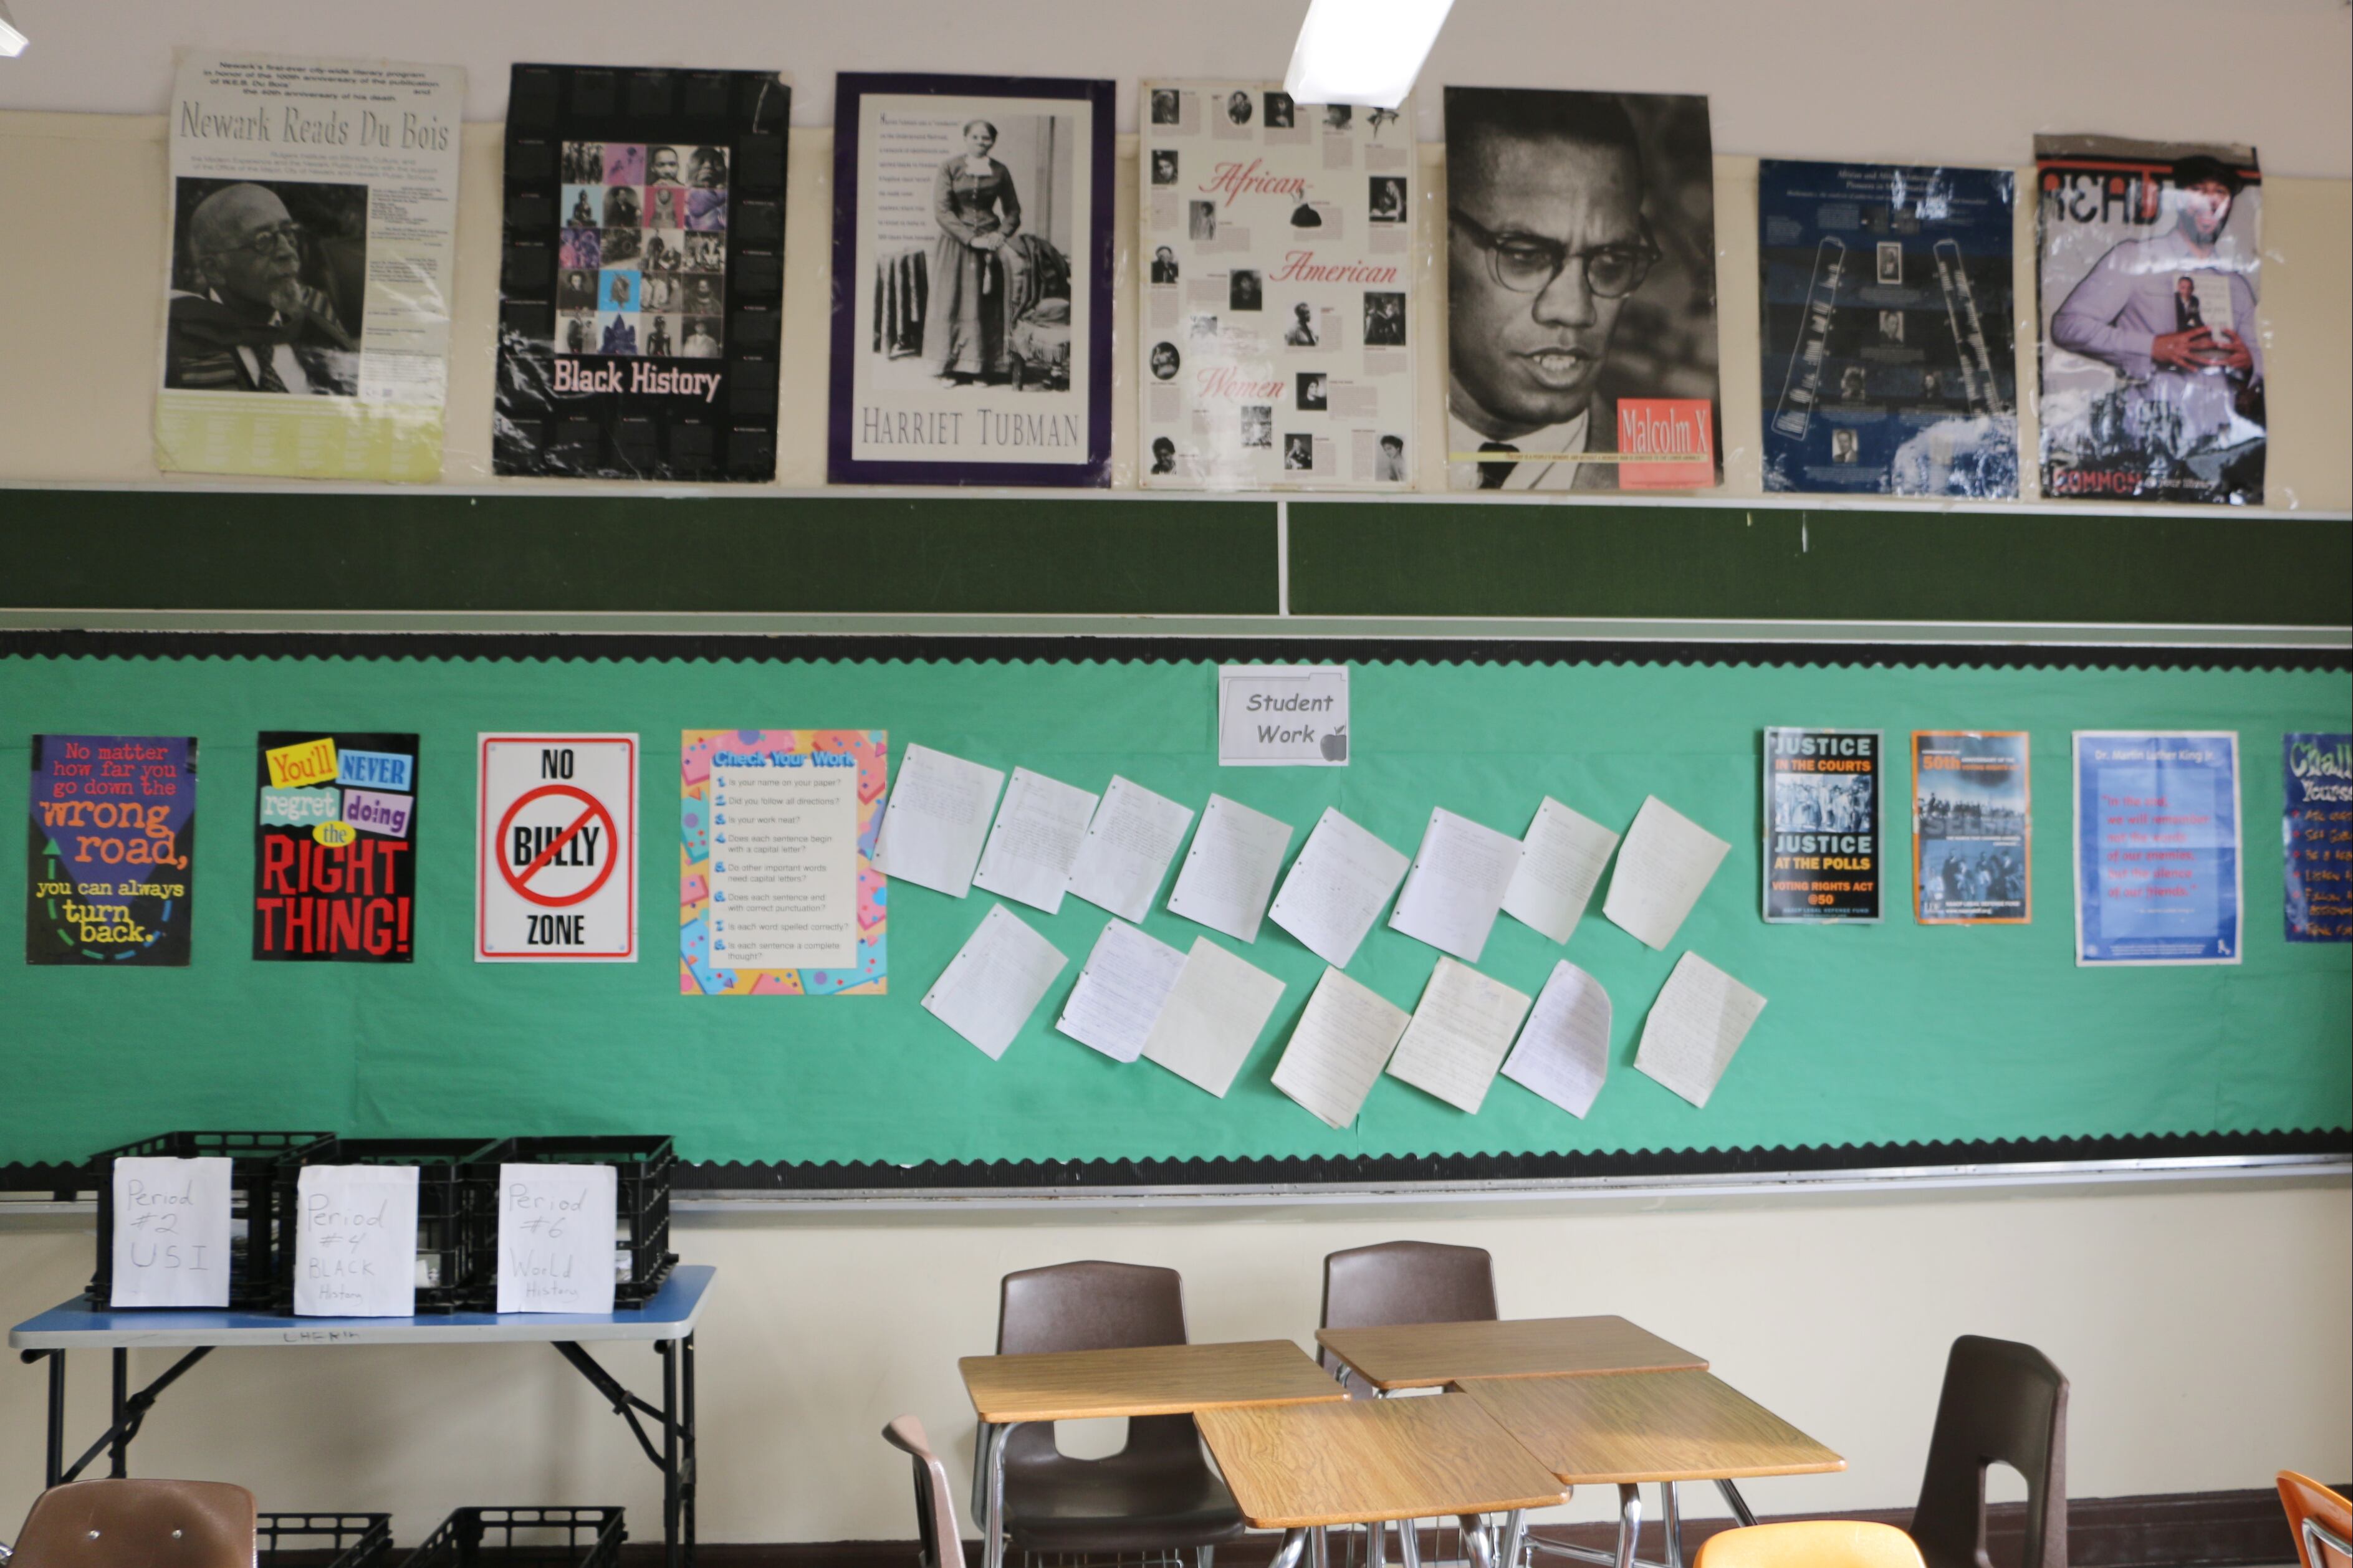 A classroom displays posters of Harriet Tubman, Malcolm X, and others on the wall, along with other instructional materials. Several desks and a small table are also visible.